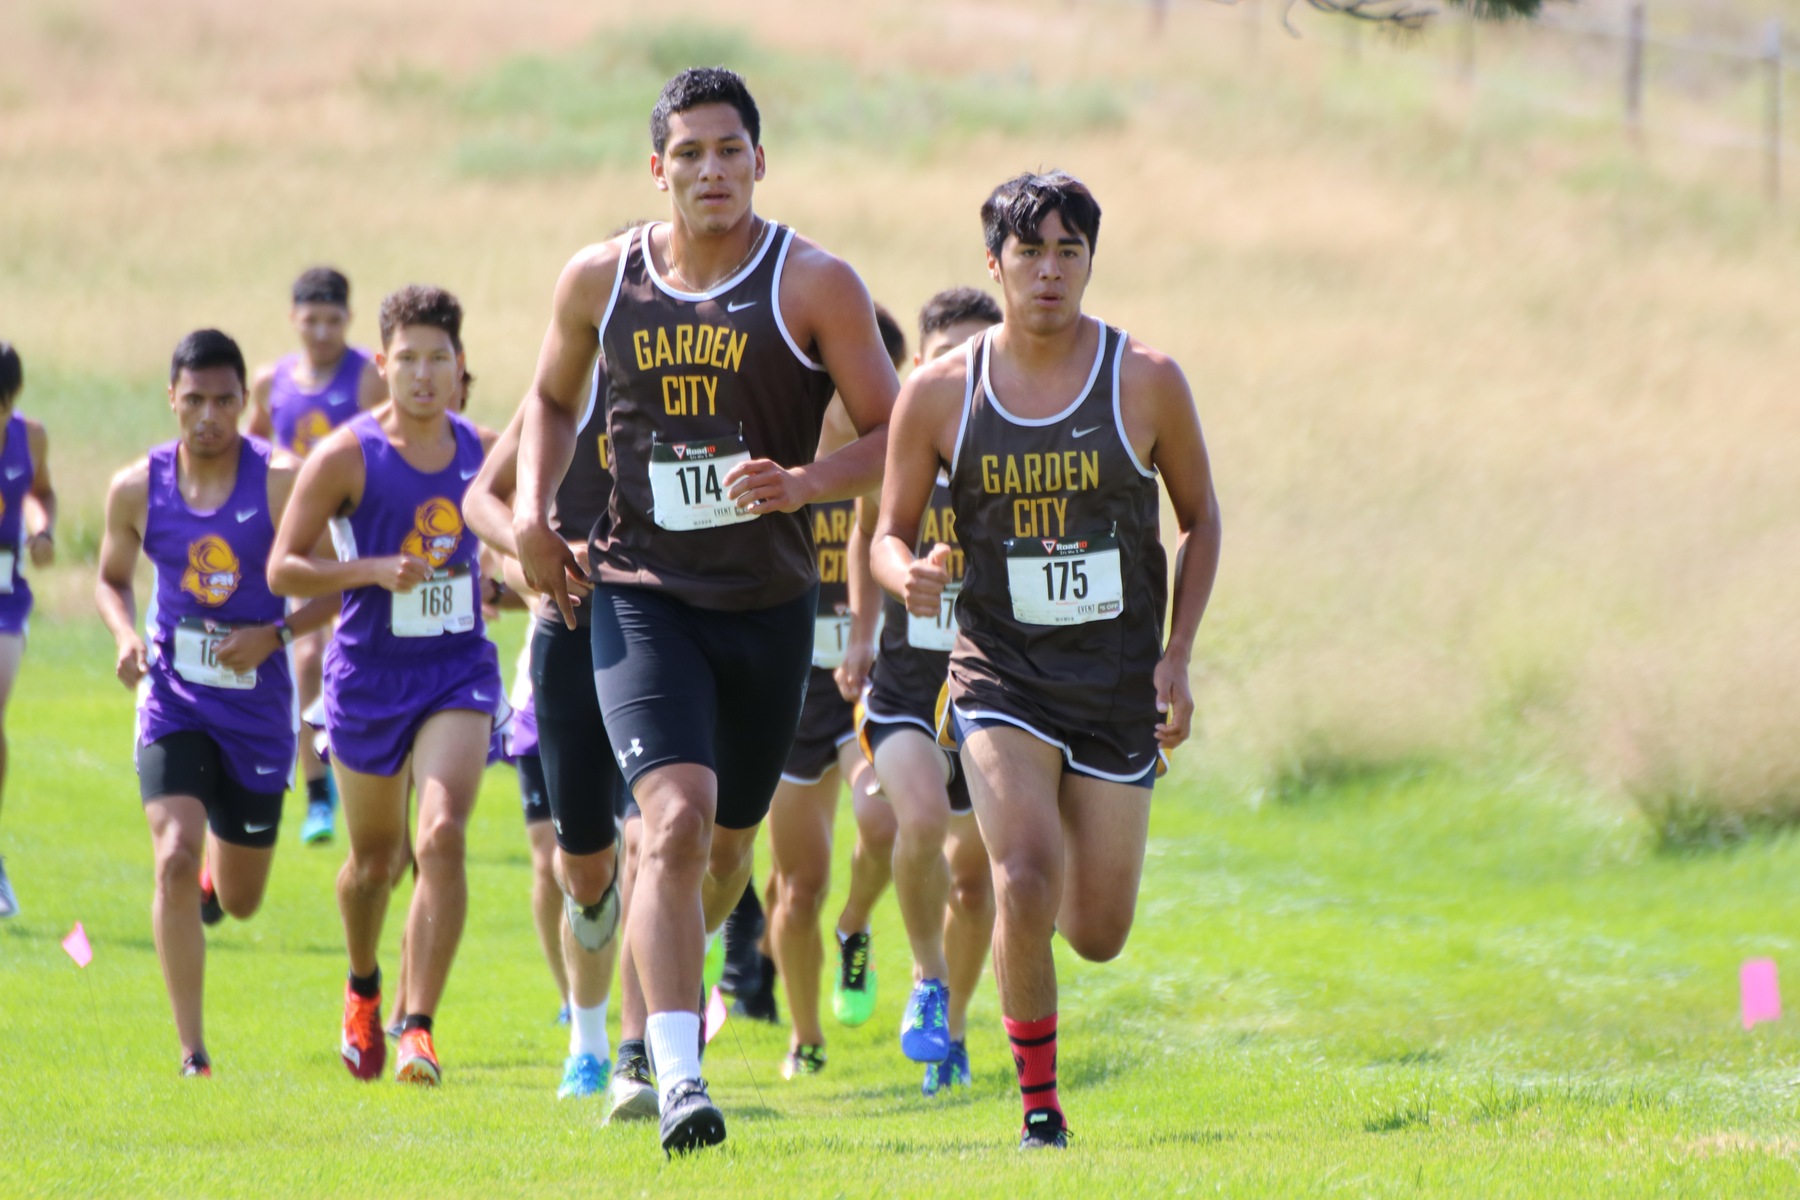 Guzman has good day as Broncbusters finish eighth